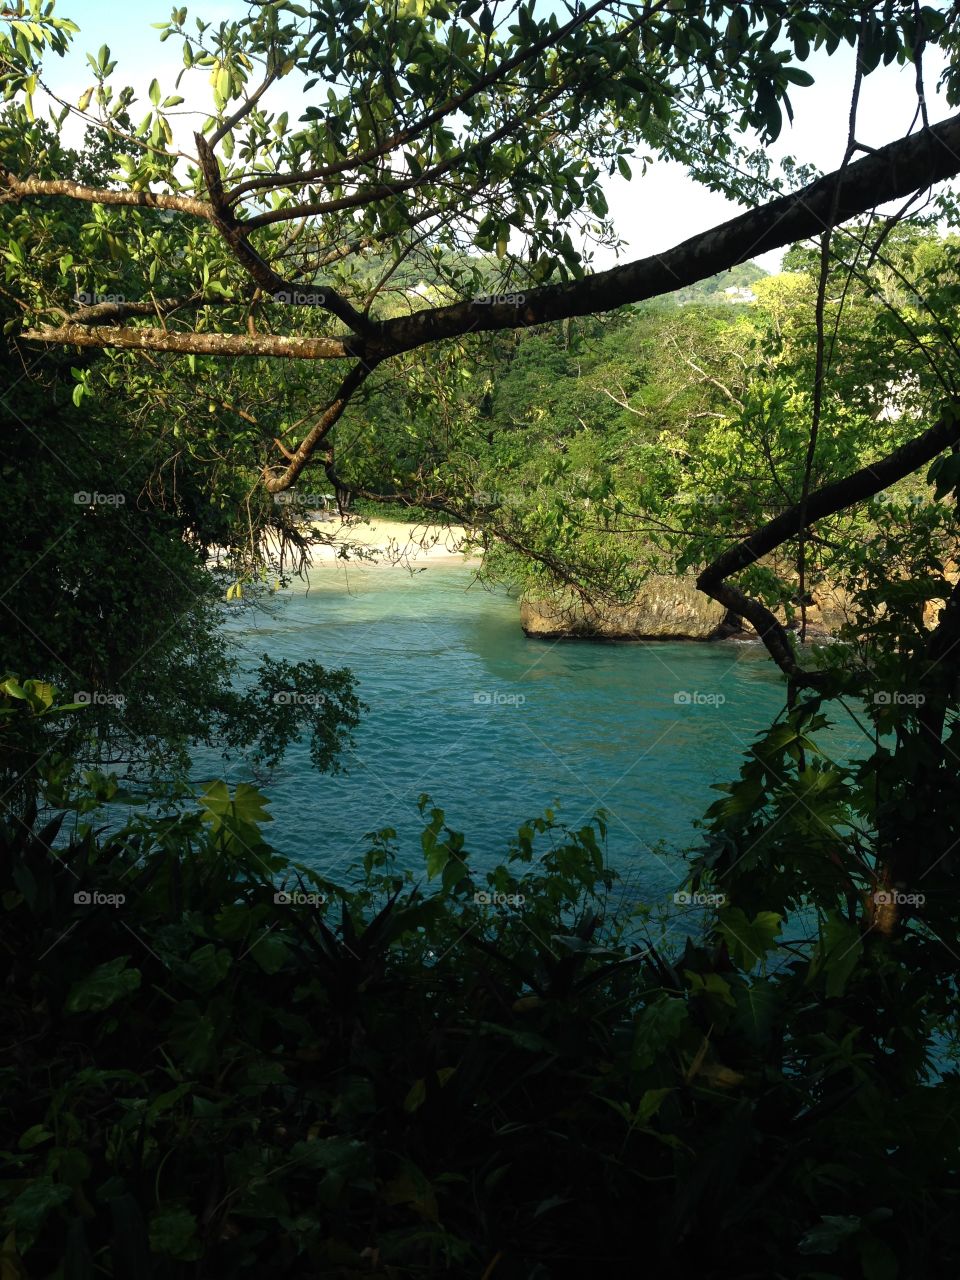 A sneak peak view of Frenchman’s cove beach from an elevated position. Cool water and white sand beaches await those who visit ! Portland , Jamaica 